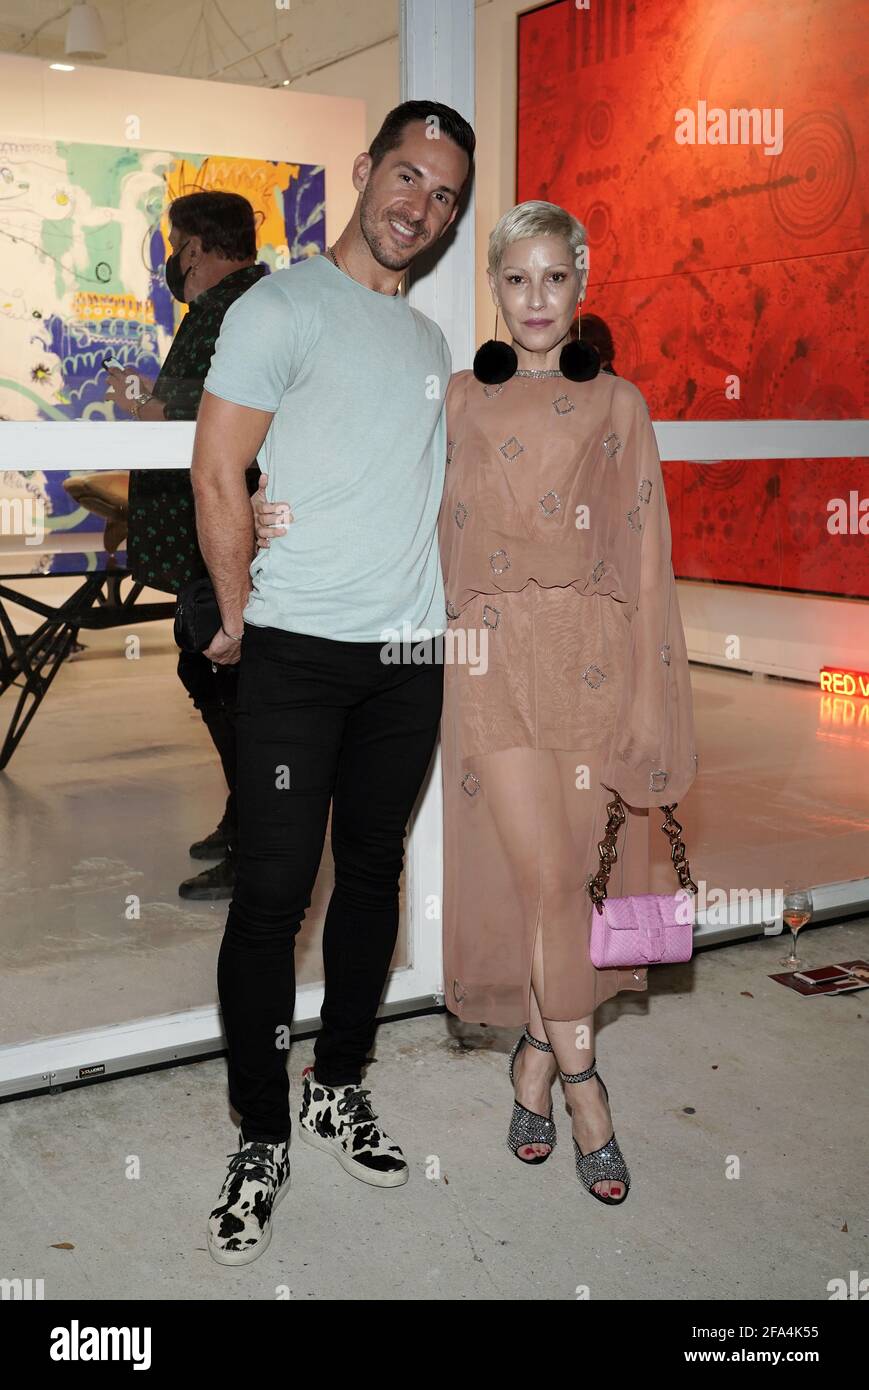 MIAMI, FL - APRIL 22: Eric Garcia and Angeles Almuna are seen at MANOLIS PROJECTS during the Mr. Freaky + Lucy opening night on April 22, 2021 in Miami, Florida. (Photo by Alberto E. Tamargo/Sipa USA) Stock Photo